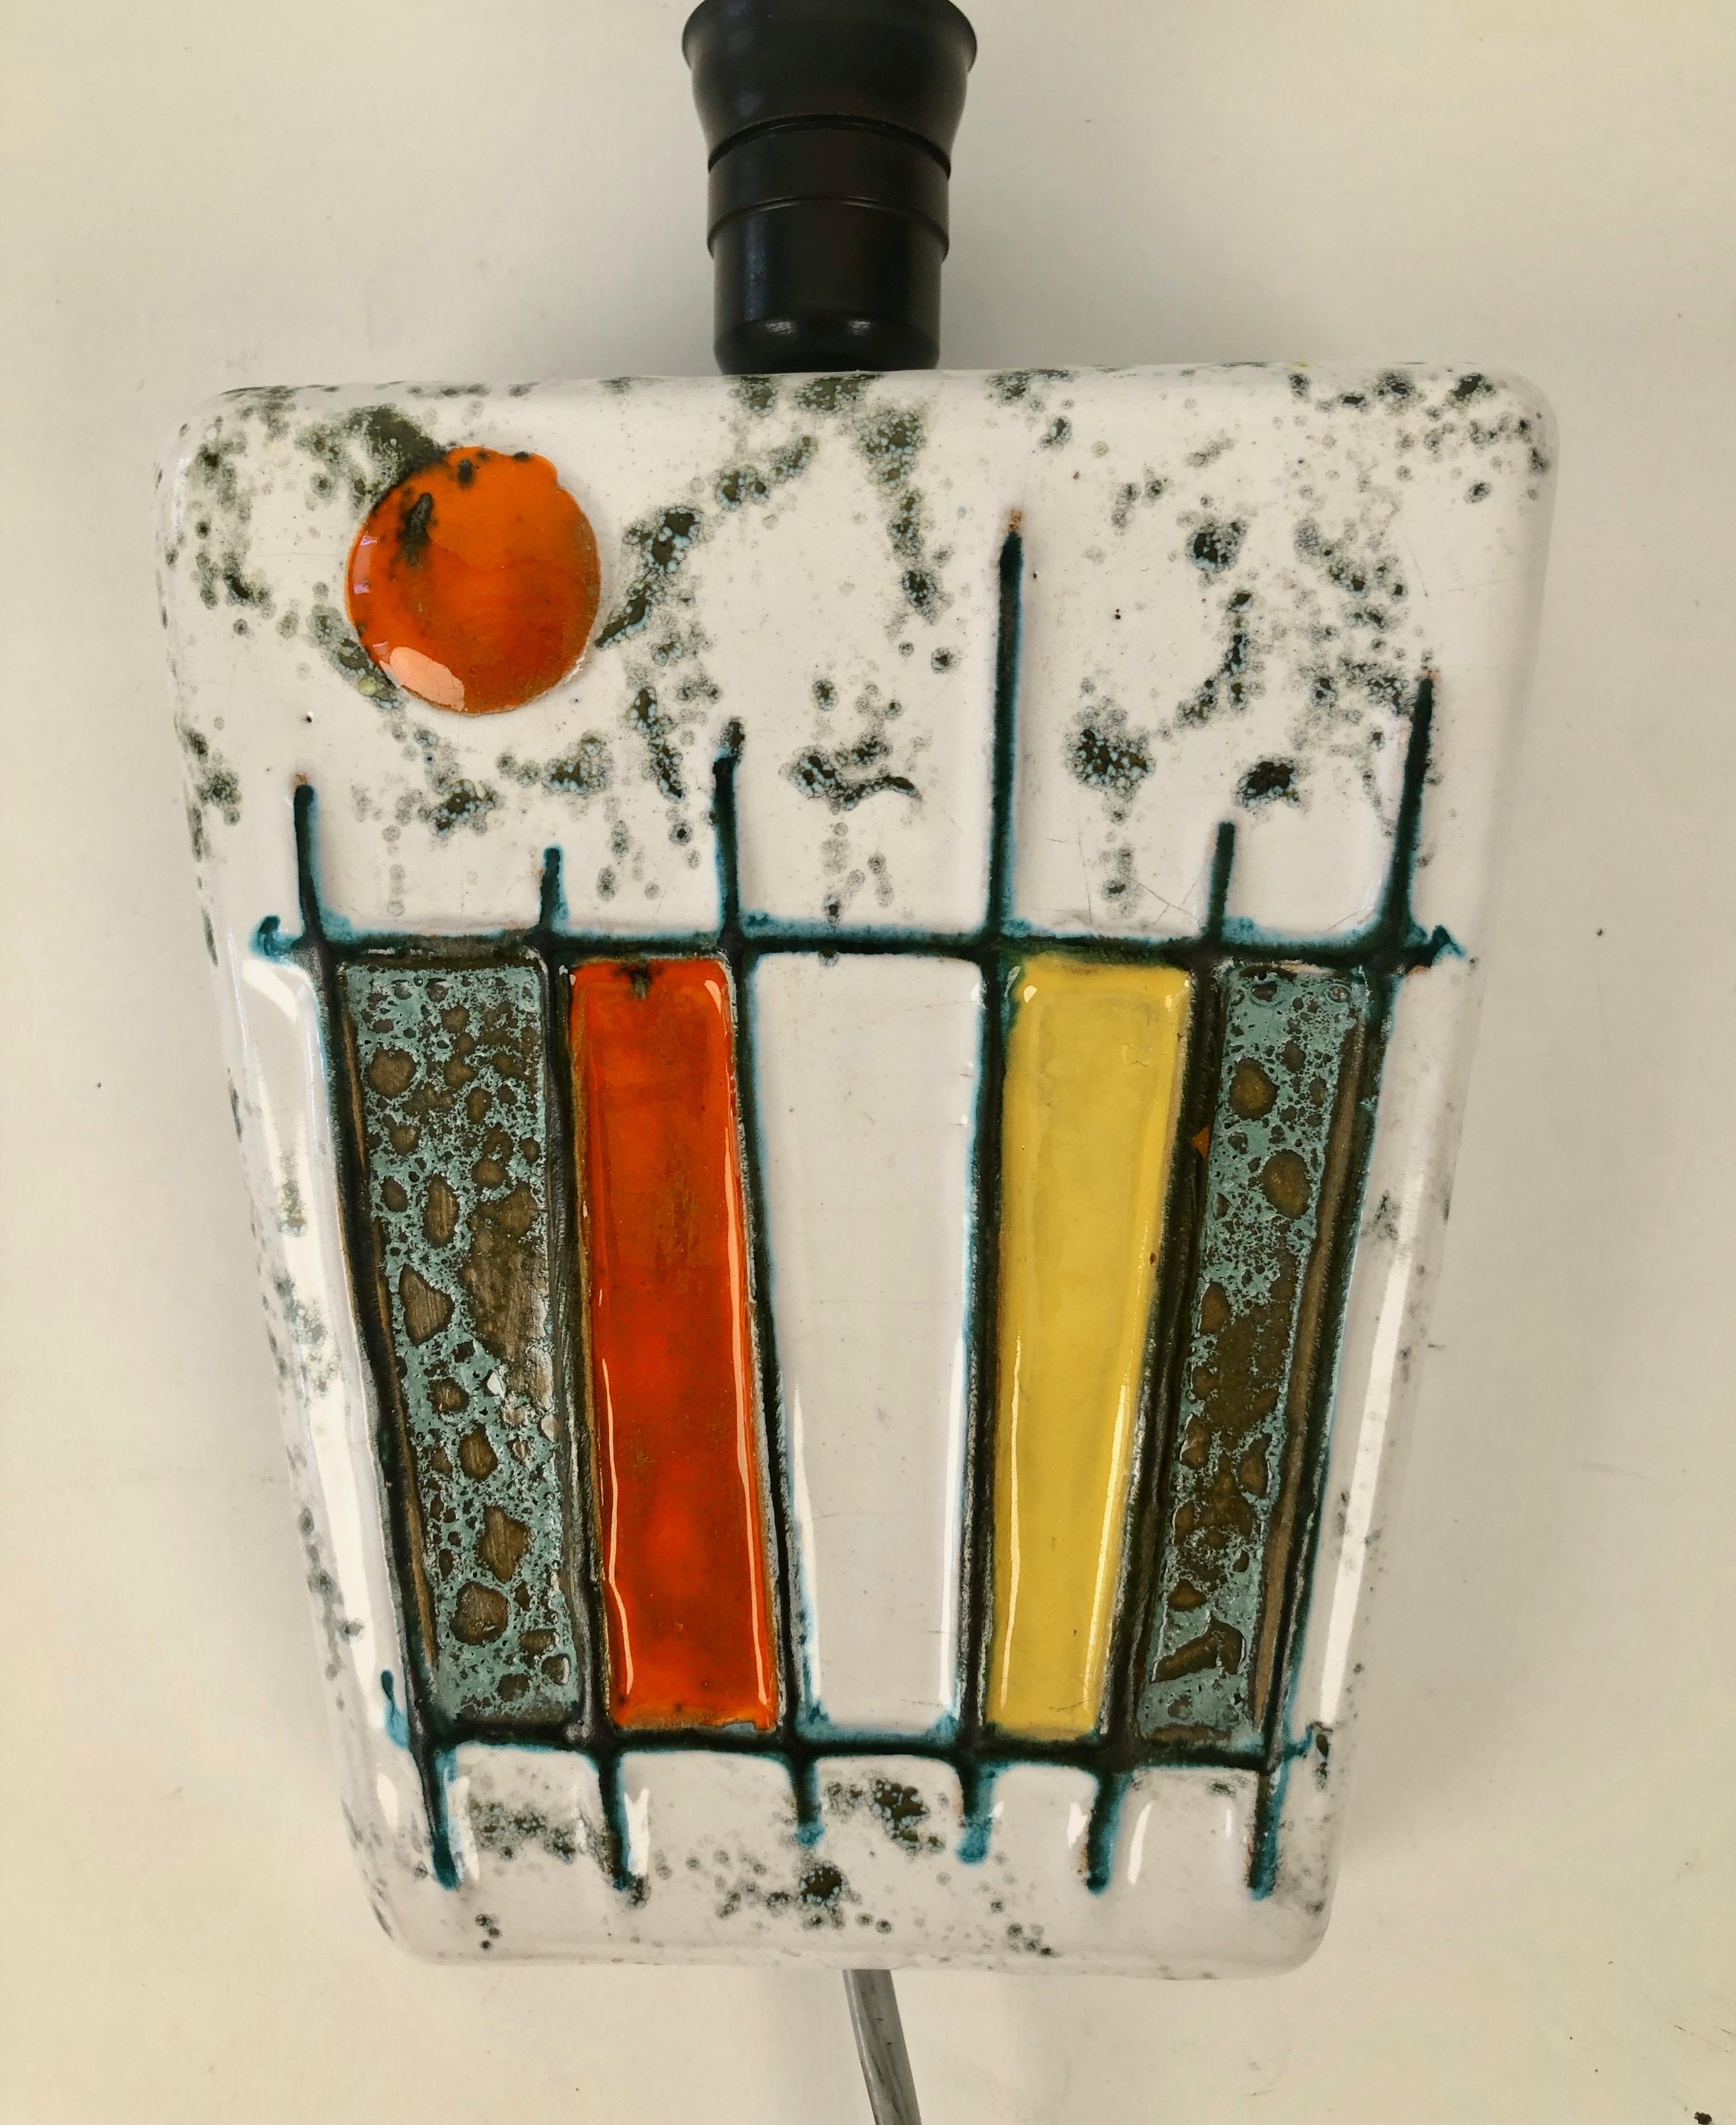 Hungarian Modernist Wall Light from The Studio Ceramics Movement, 1950's, Hungary For Sale